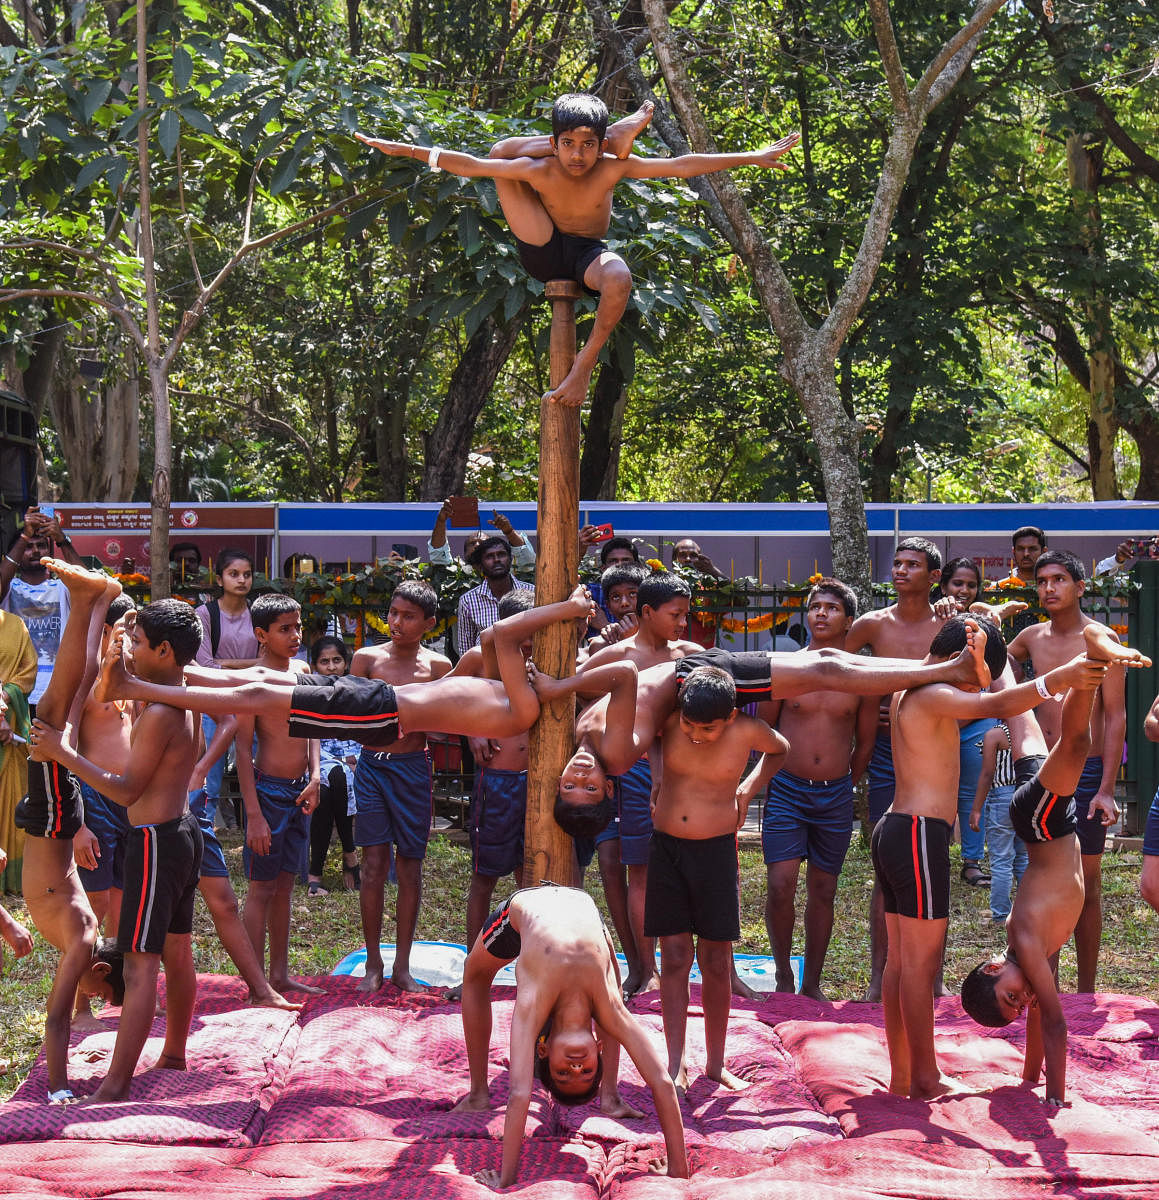 Students of Balamandira Bengaluru performing Mallkamba in ‘Makkala Habba’ as the part of Children’s Day organised by Women and Child welfare department, Horticulture Department in association with various departments at Sri Chamarajendra Park (Cubbo